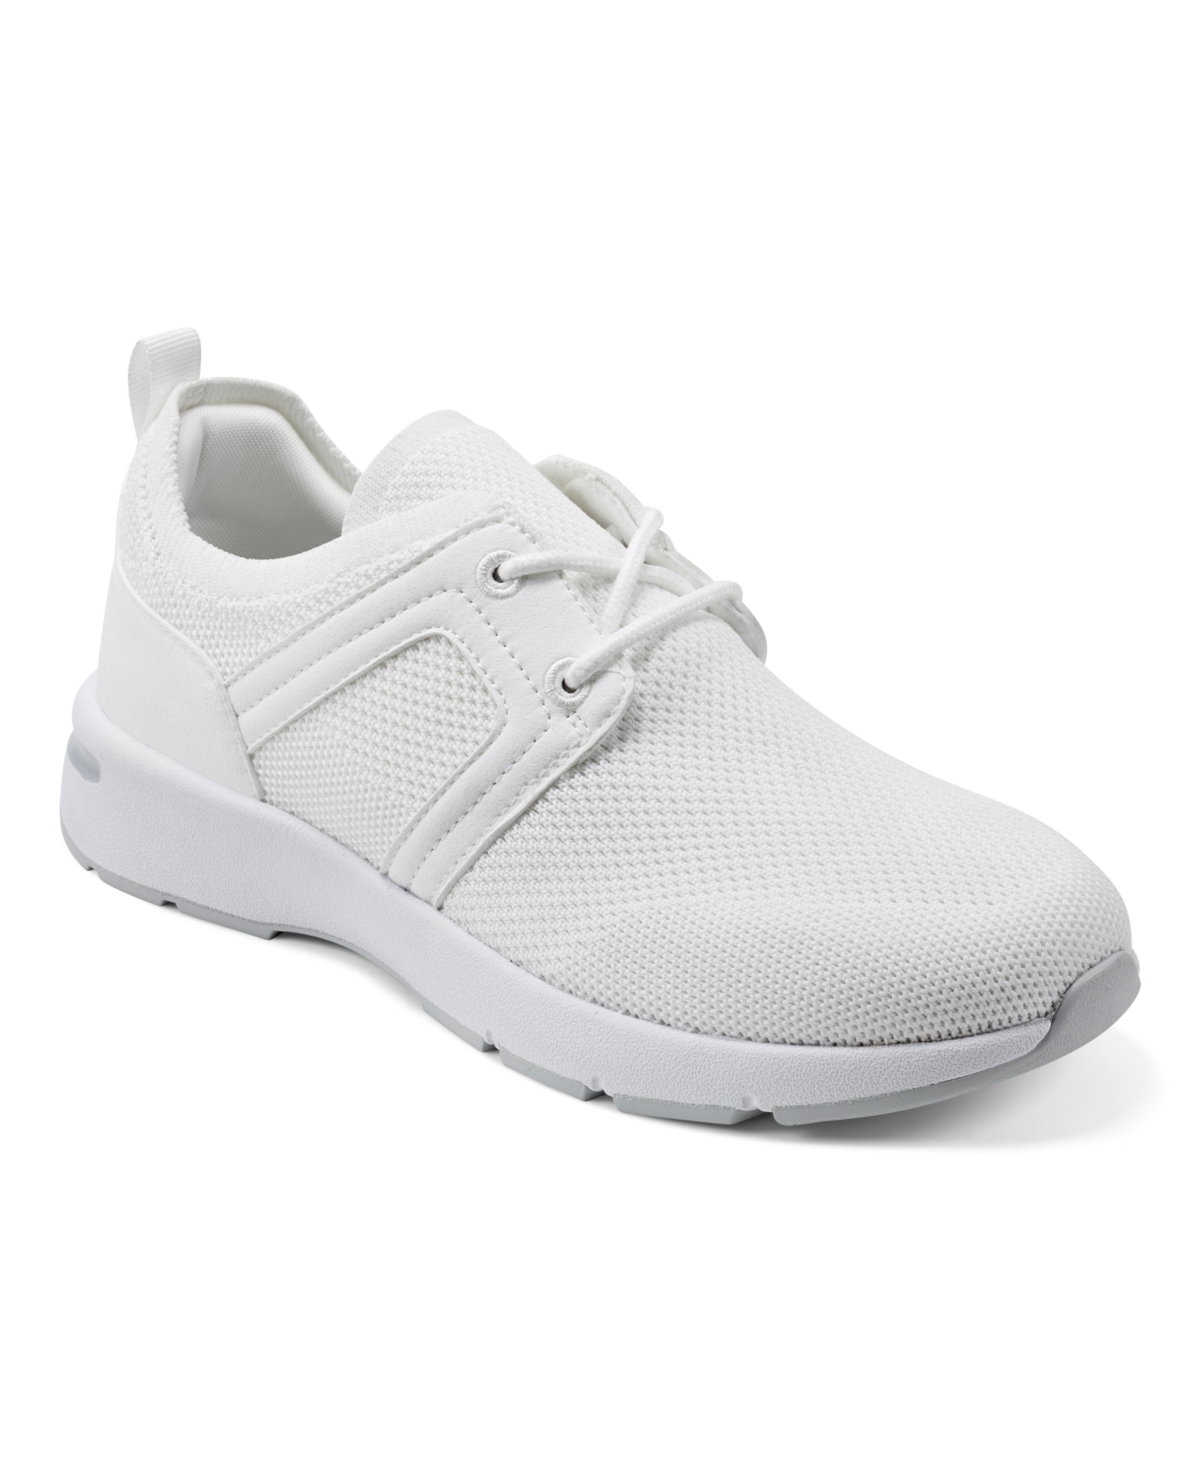 Women's Hellen Round Toe Lace-Up Casual Sneakers - White